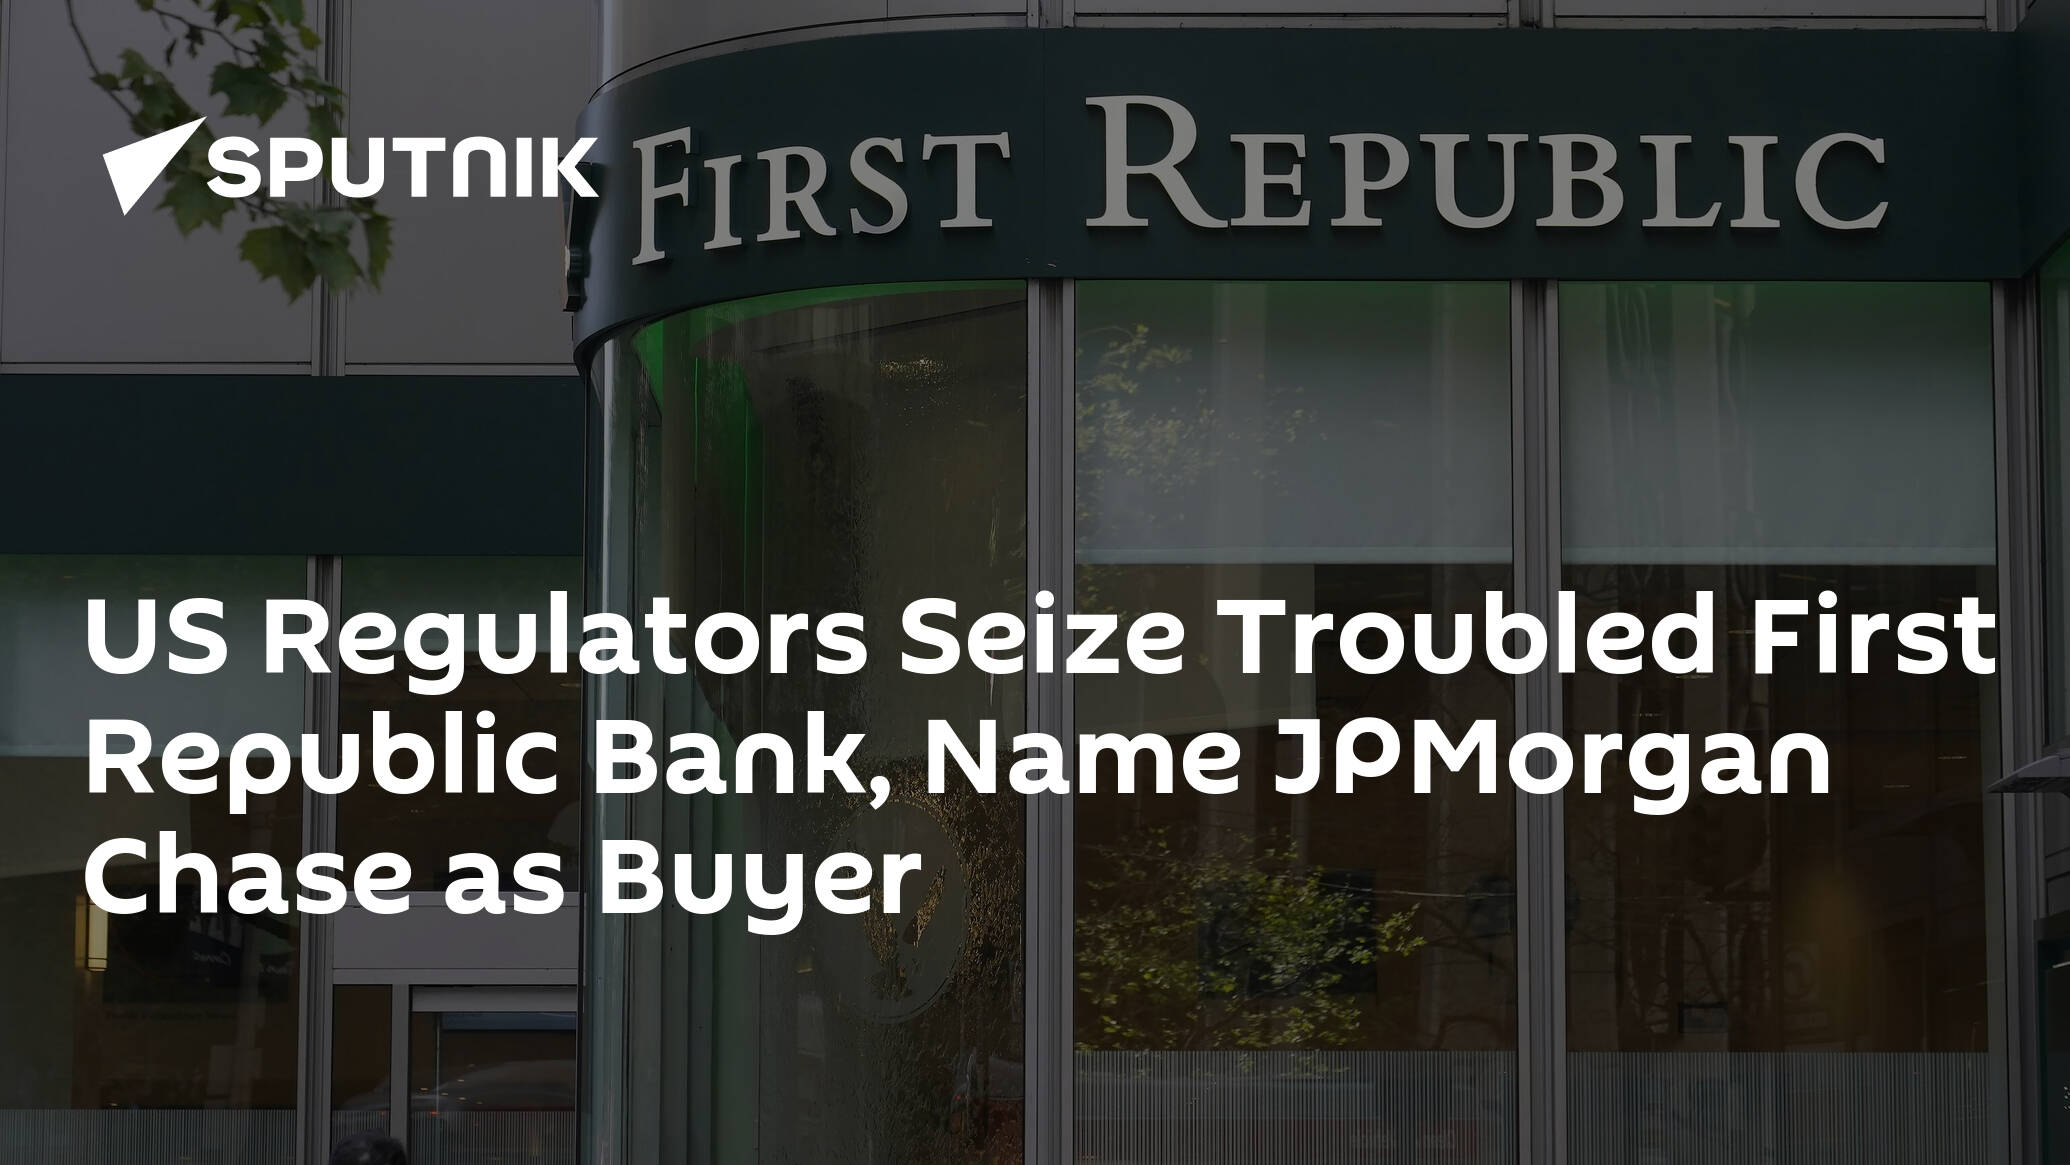 US Regulators Seize Troubled First Republic Bank, Name JPMorgan Chase as Buyer